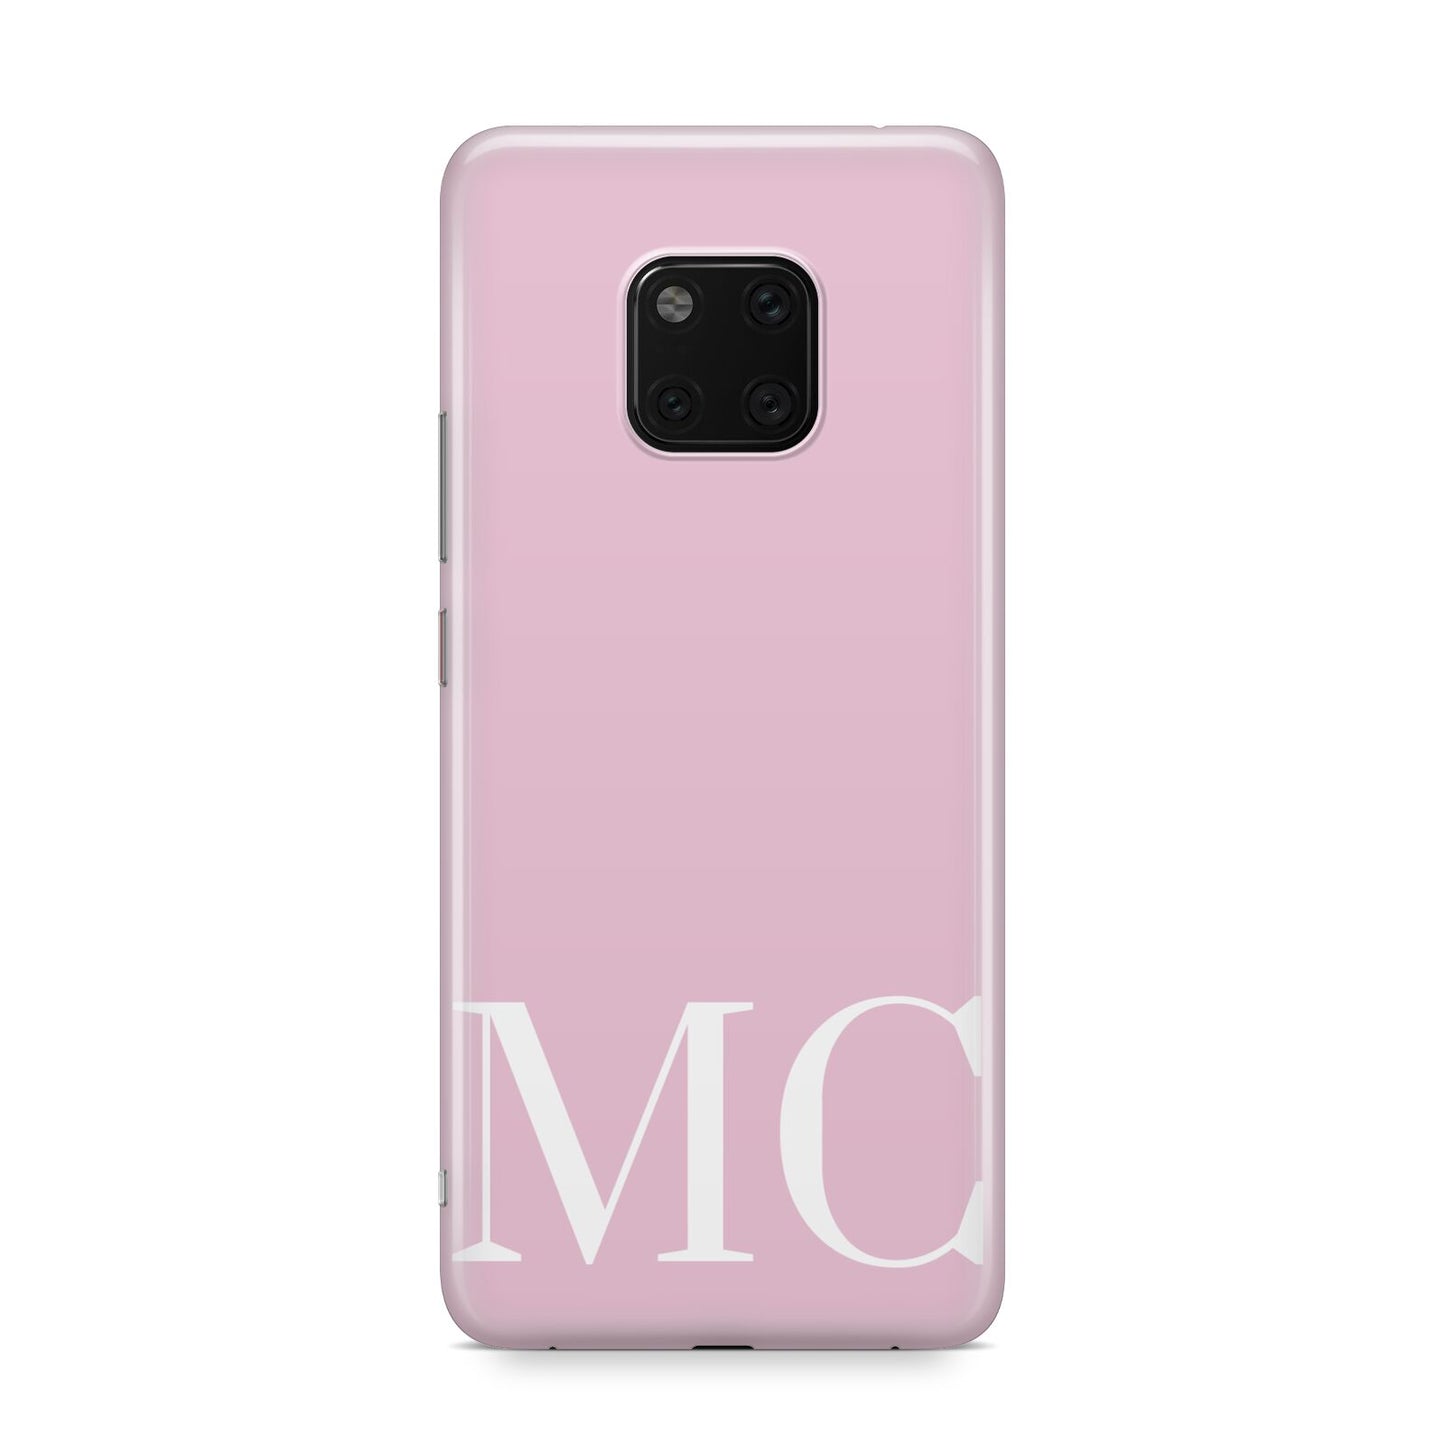 Initials Personalised 2 Huawei Mate 20 Pro Phone Case